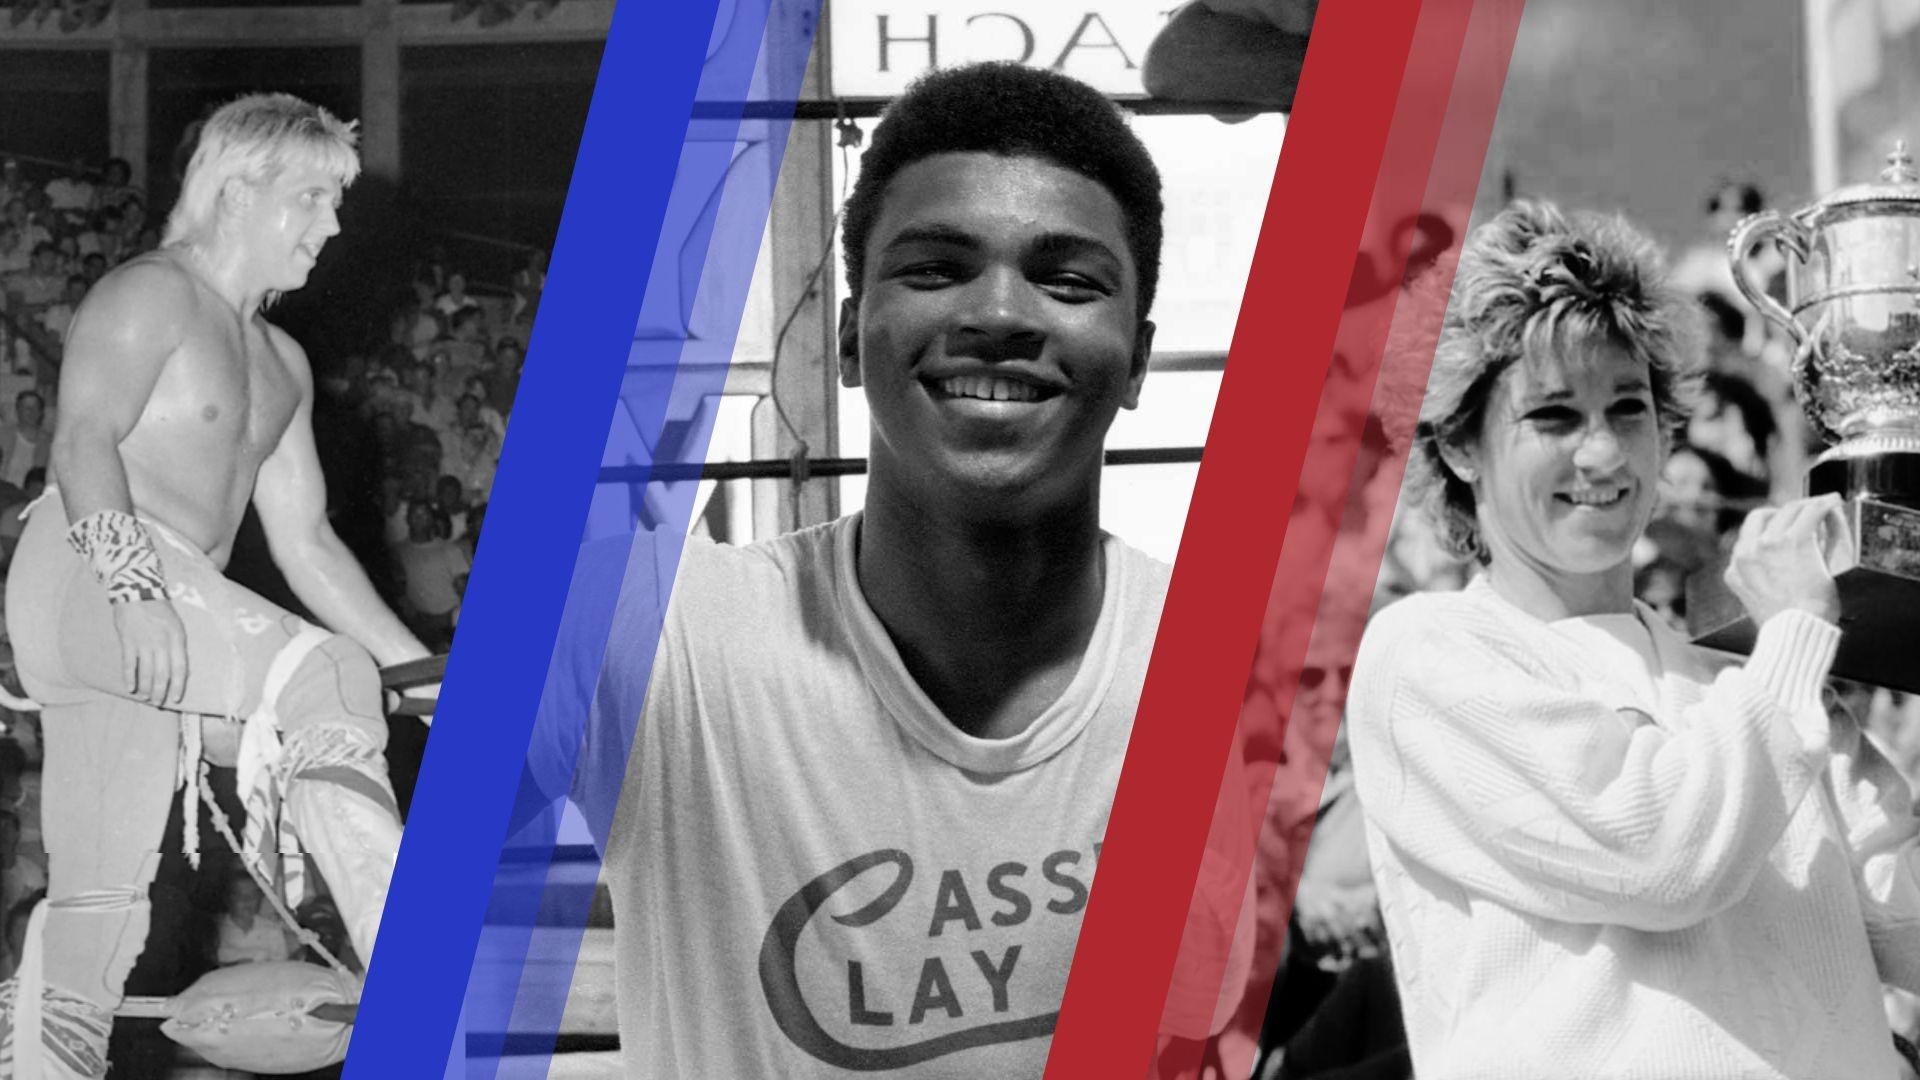 Black and white images of iconic sports figures: Ric Flair, Muhammad Ali, and Chris Evert with blue and red slashes between the images.